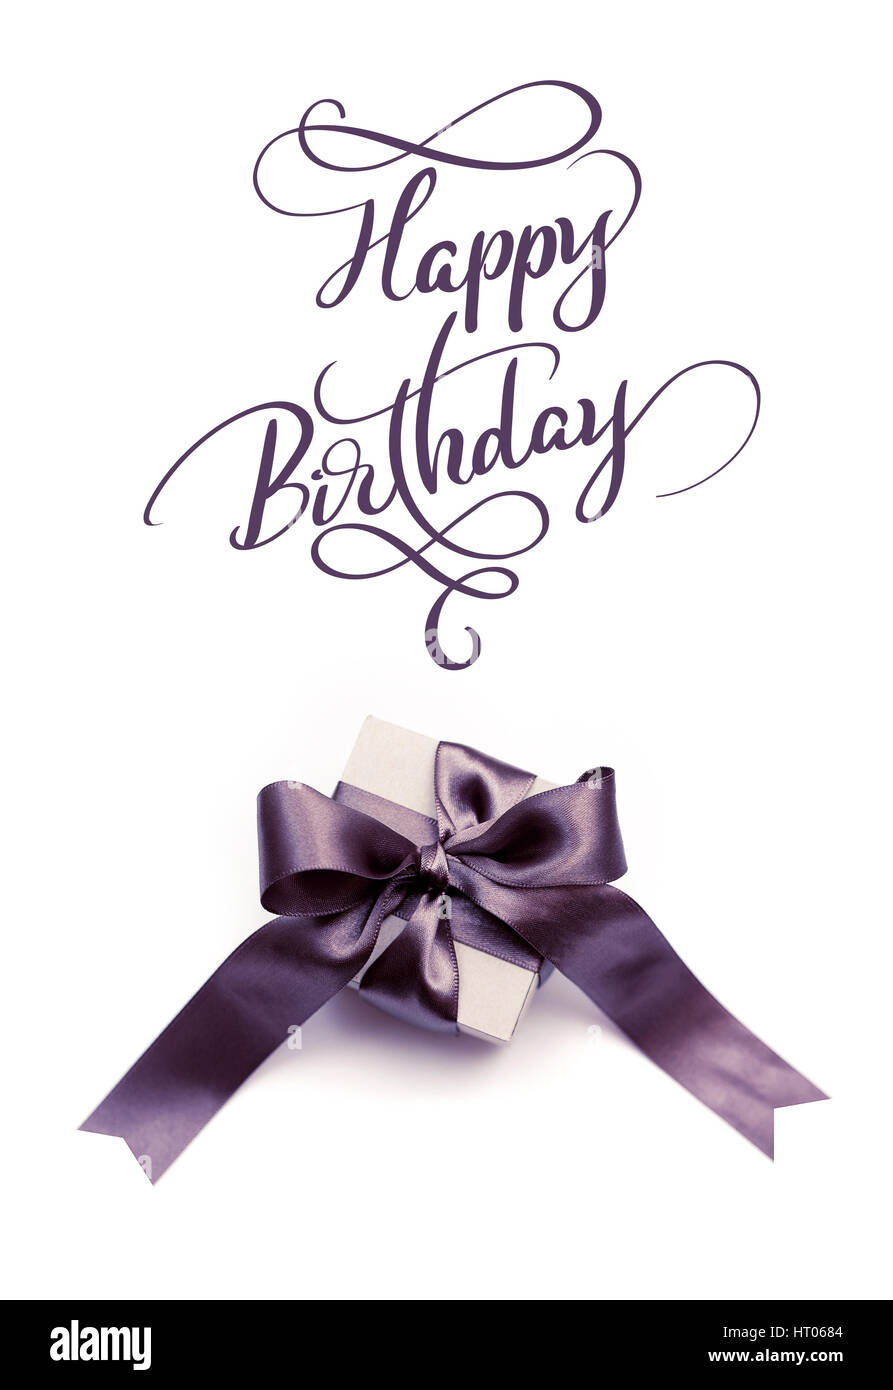 Gift box with brown bow on a white background and text Happy Birthday. Calligraphy lettering Stock Photo